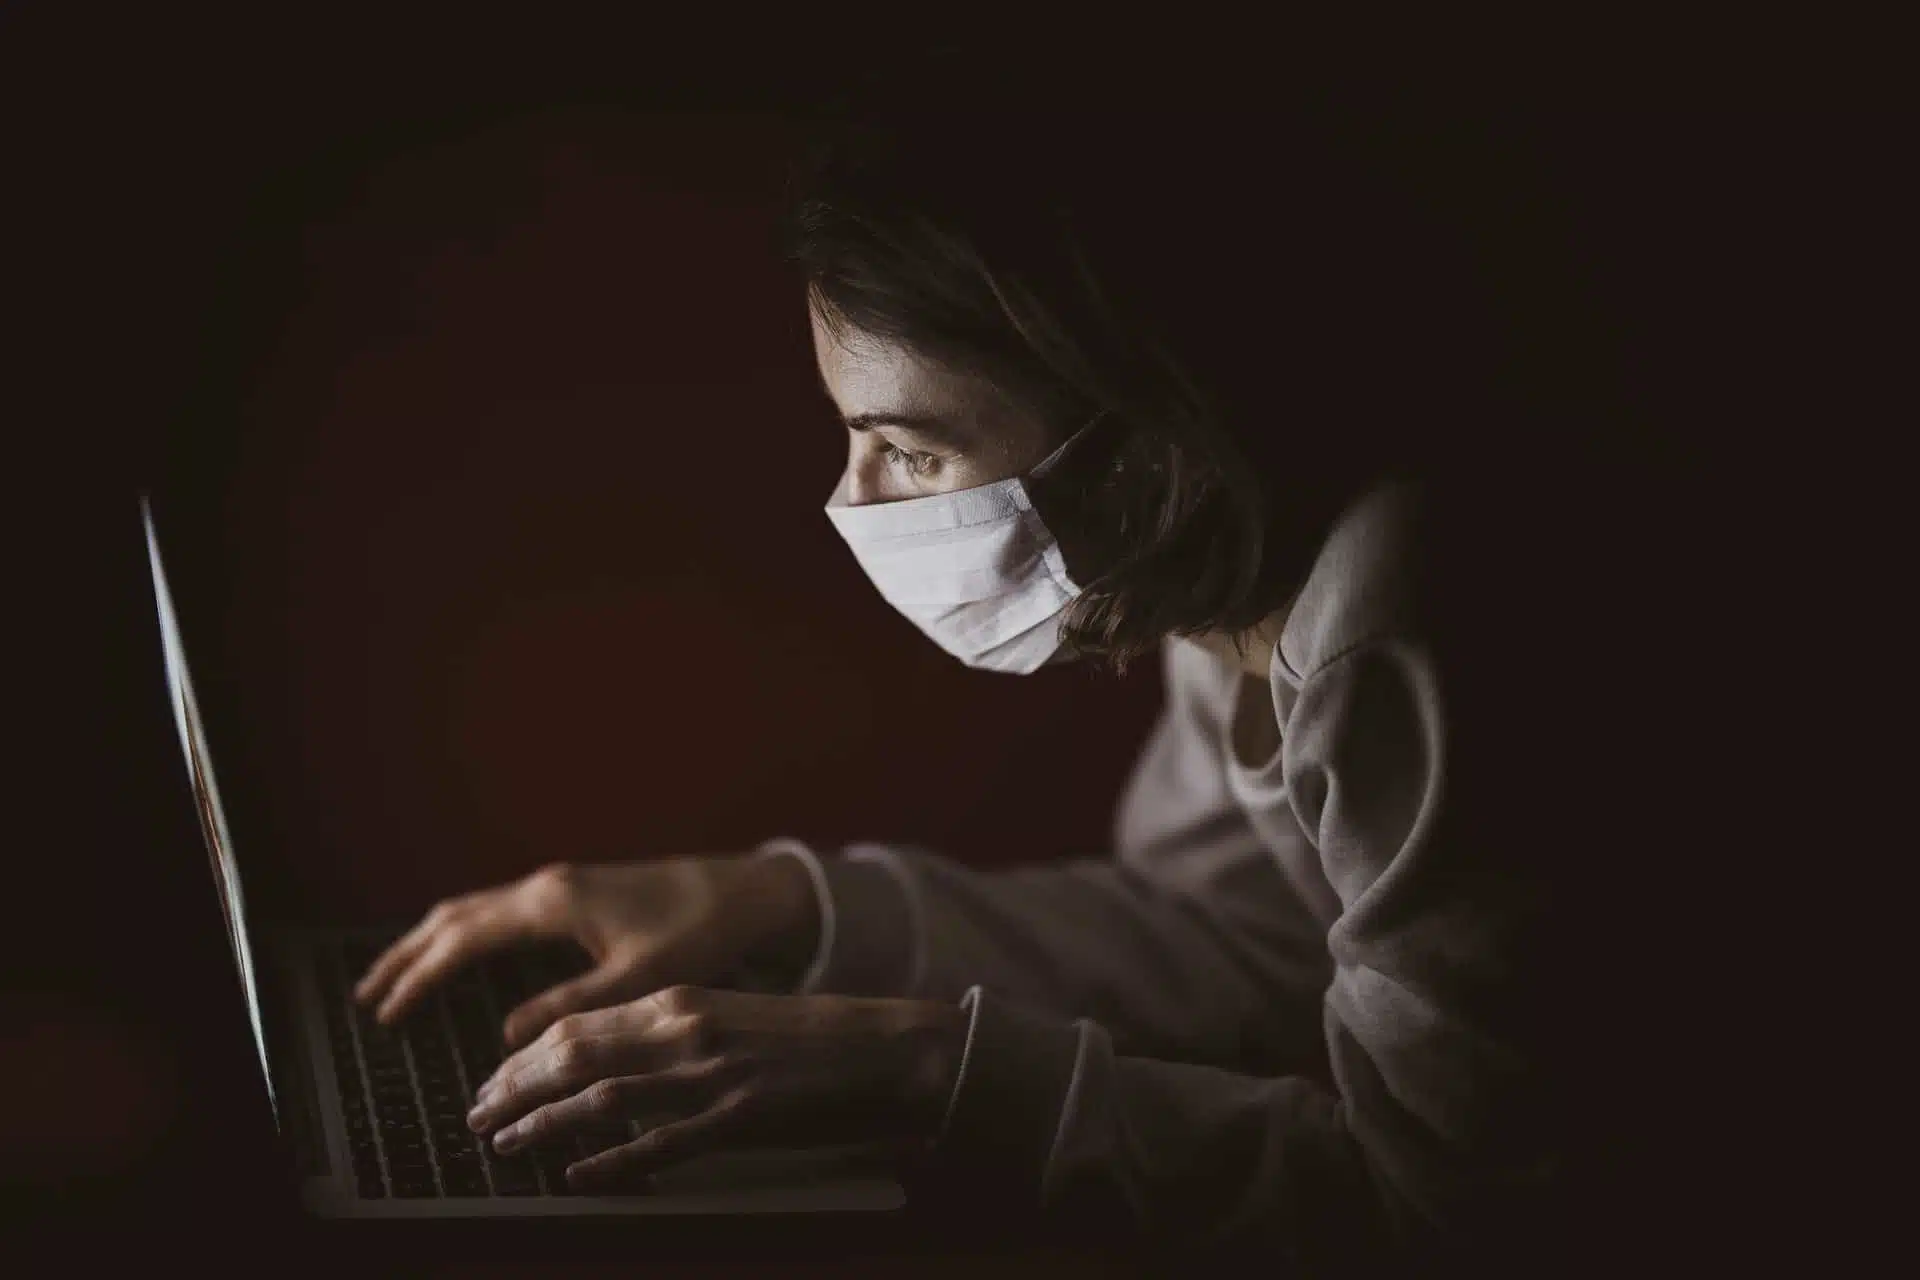 Student working on a laptop while wearing a face mask during COVID-19 pandemic